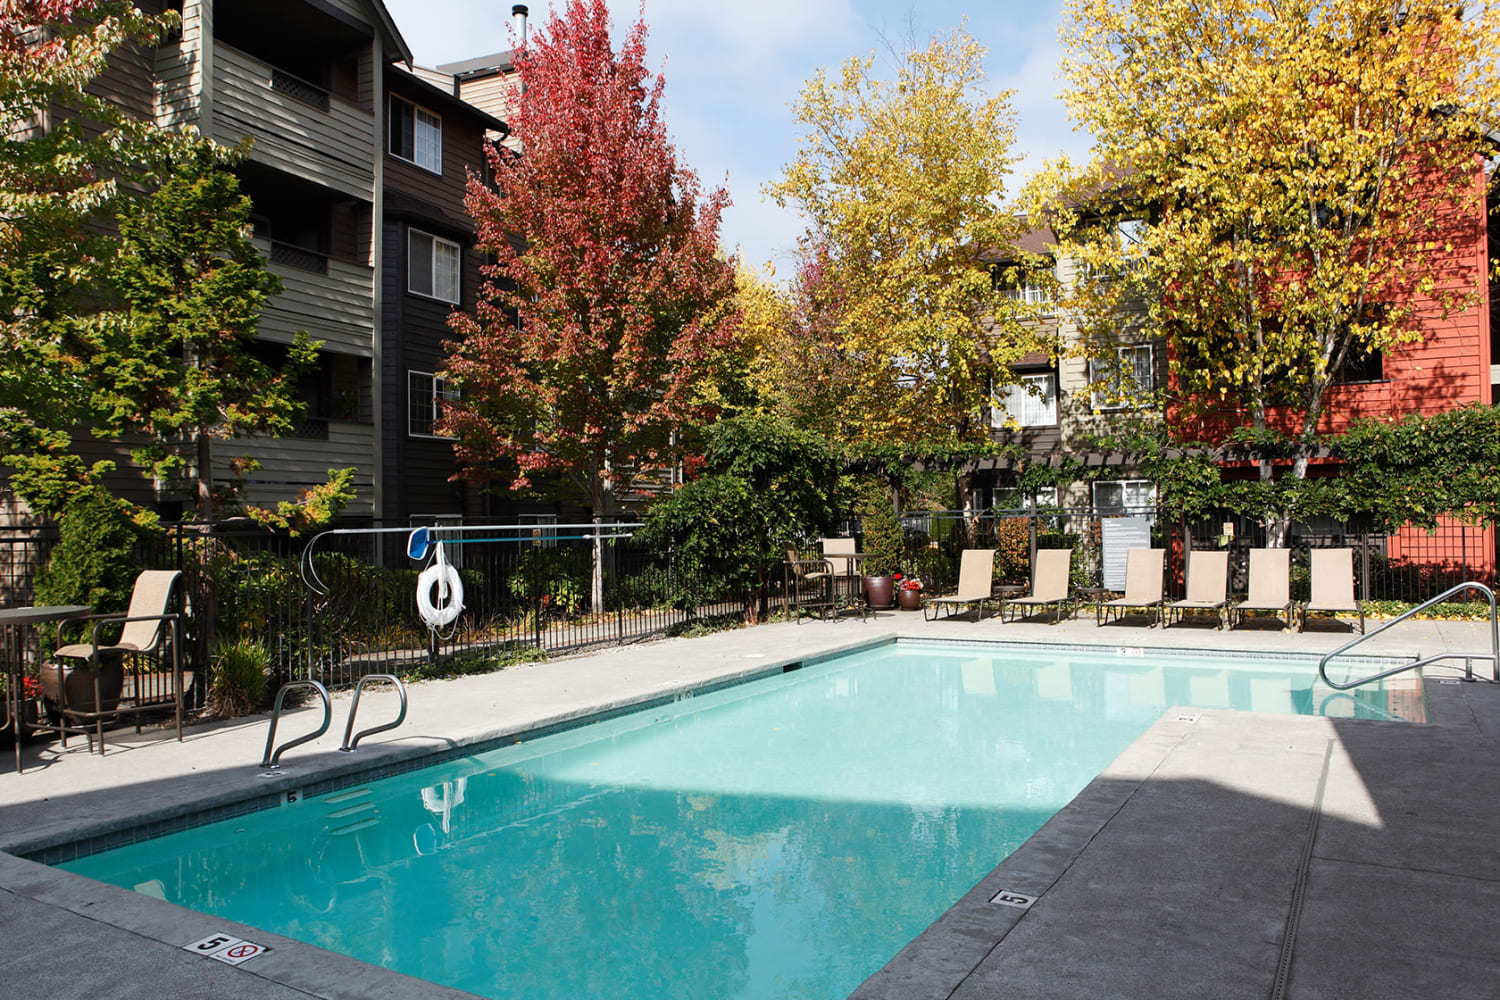 Pool with lounging chairs at Redmond Place Apartments in Redmond, Washington